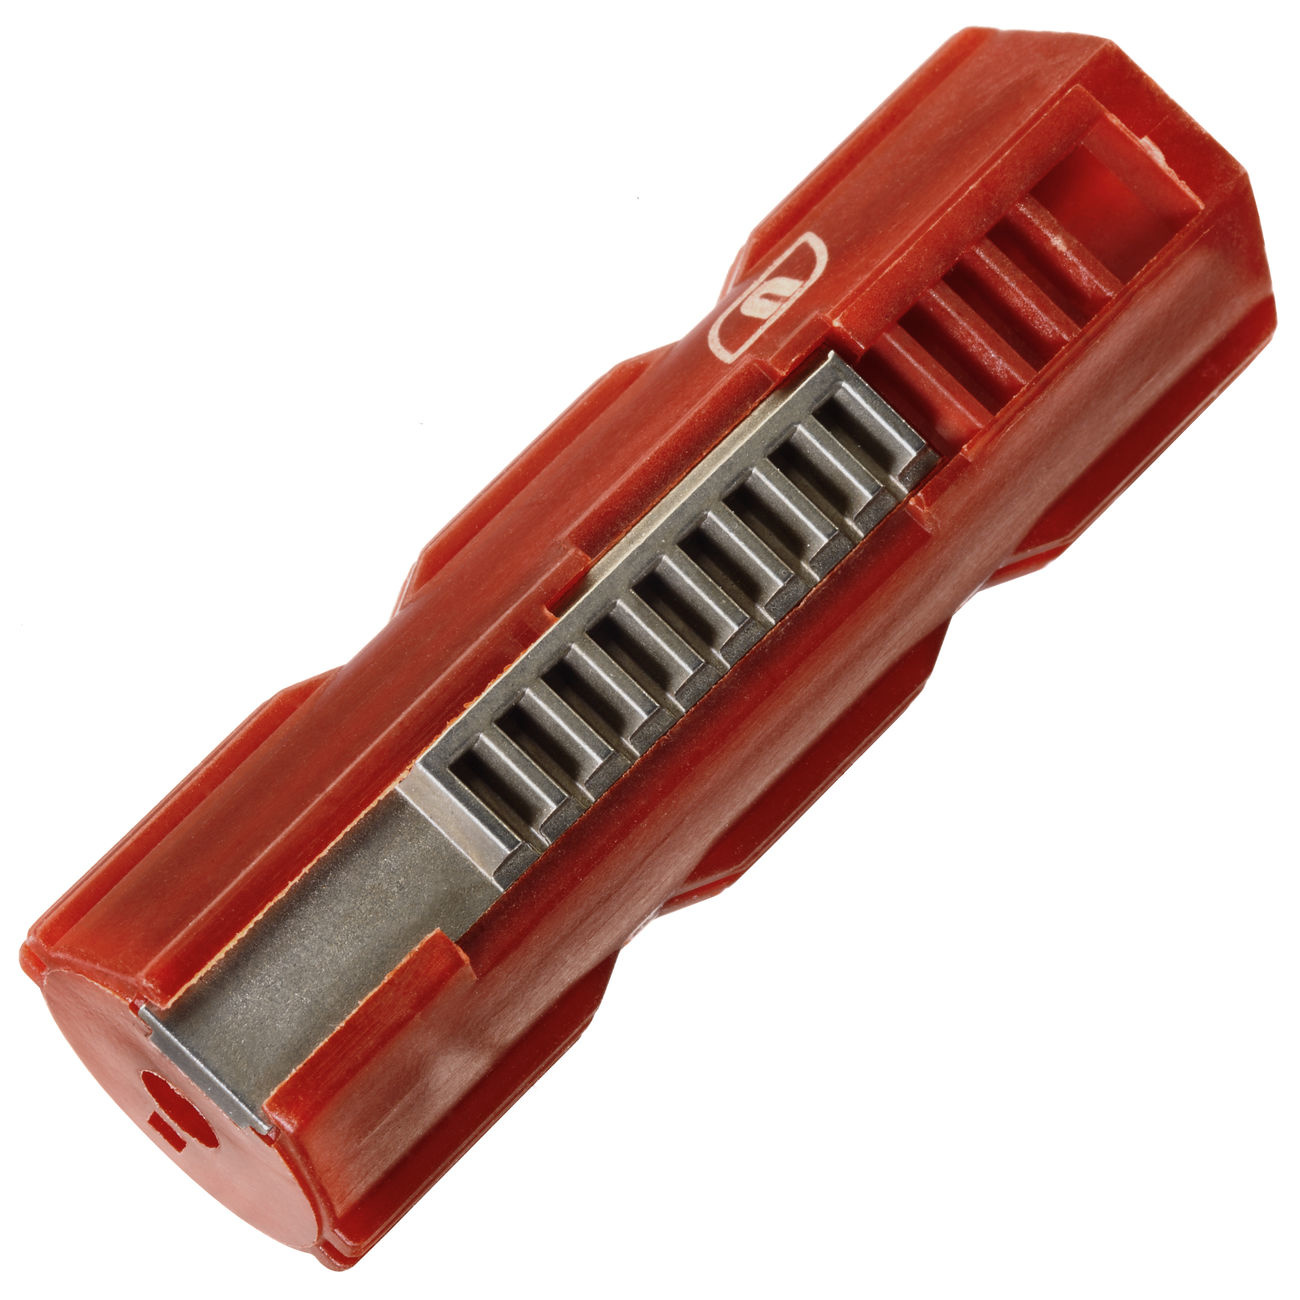 ASG Ultimate M170 Polycarbonate Piston - 14 Full Teeth - Red